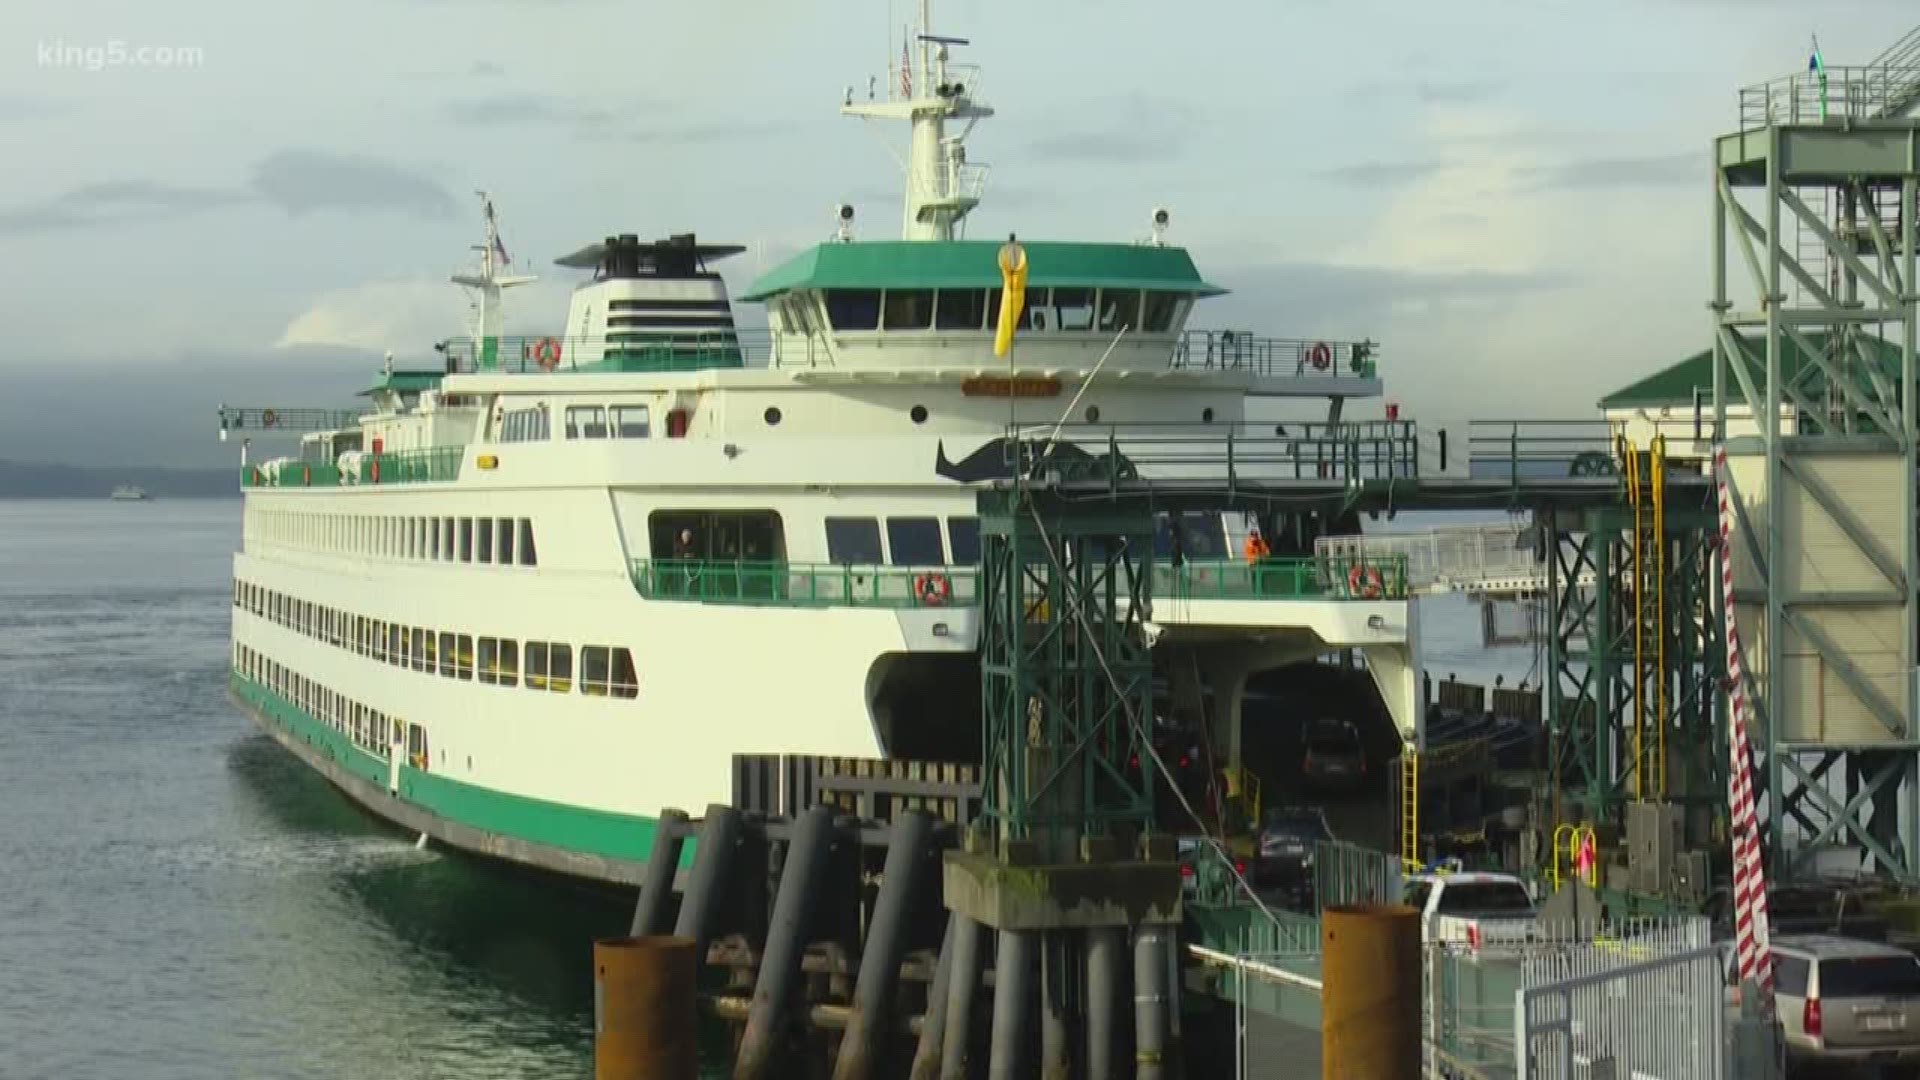 Starting tomorrow through Sunday, ferry officials expect 350-thousand riders, about 50-thousand more than a regular week.